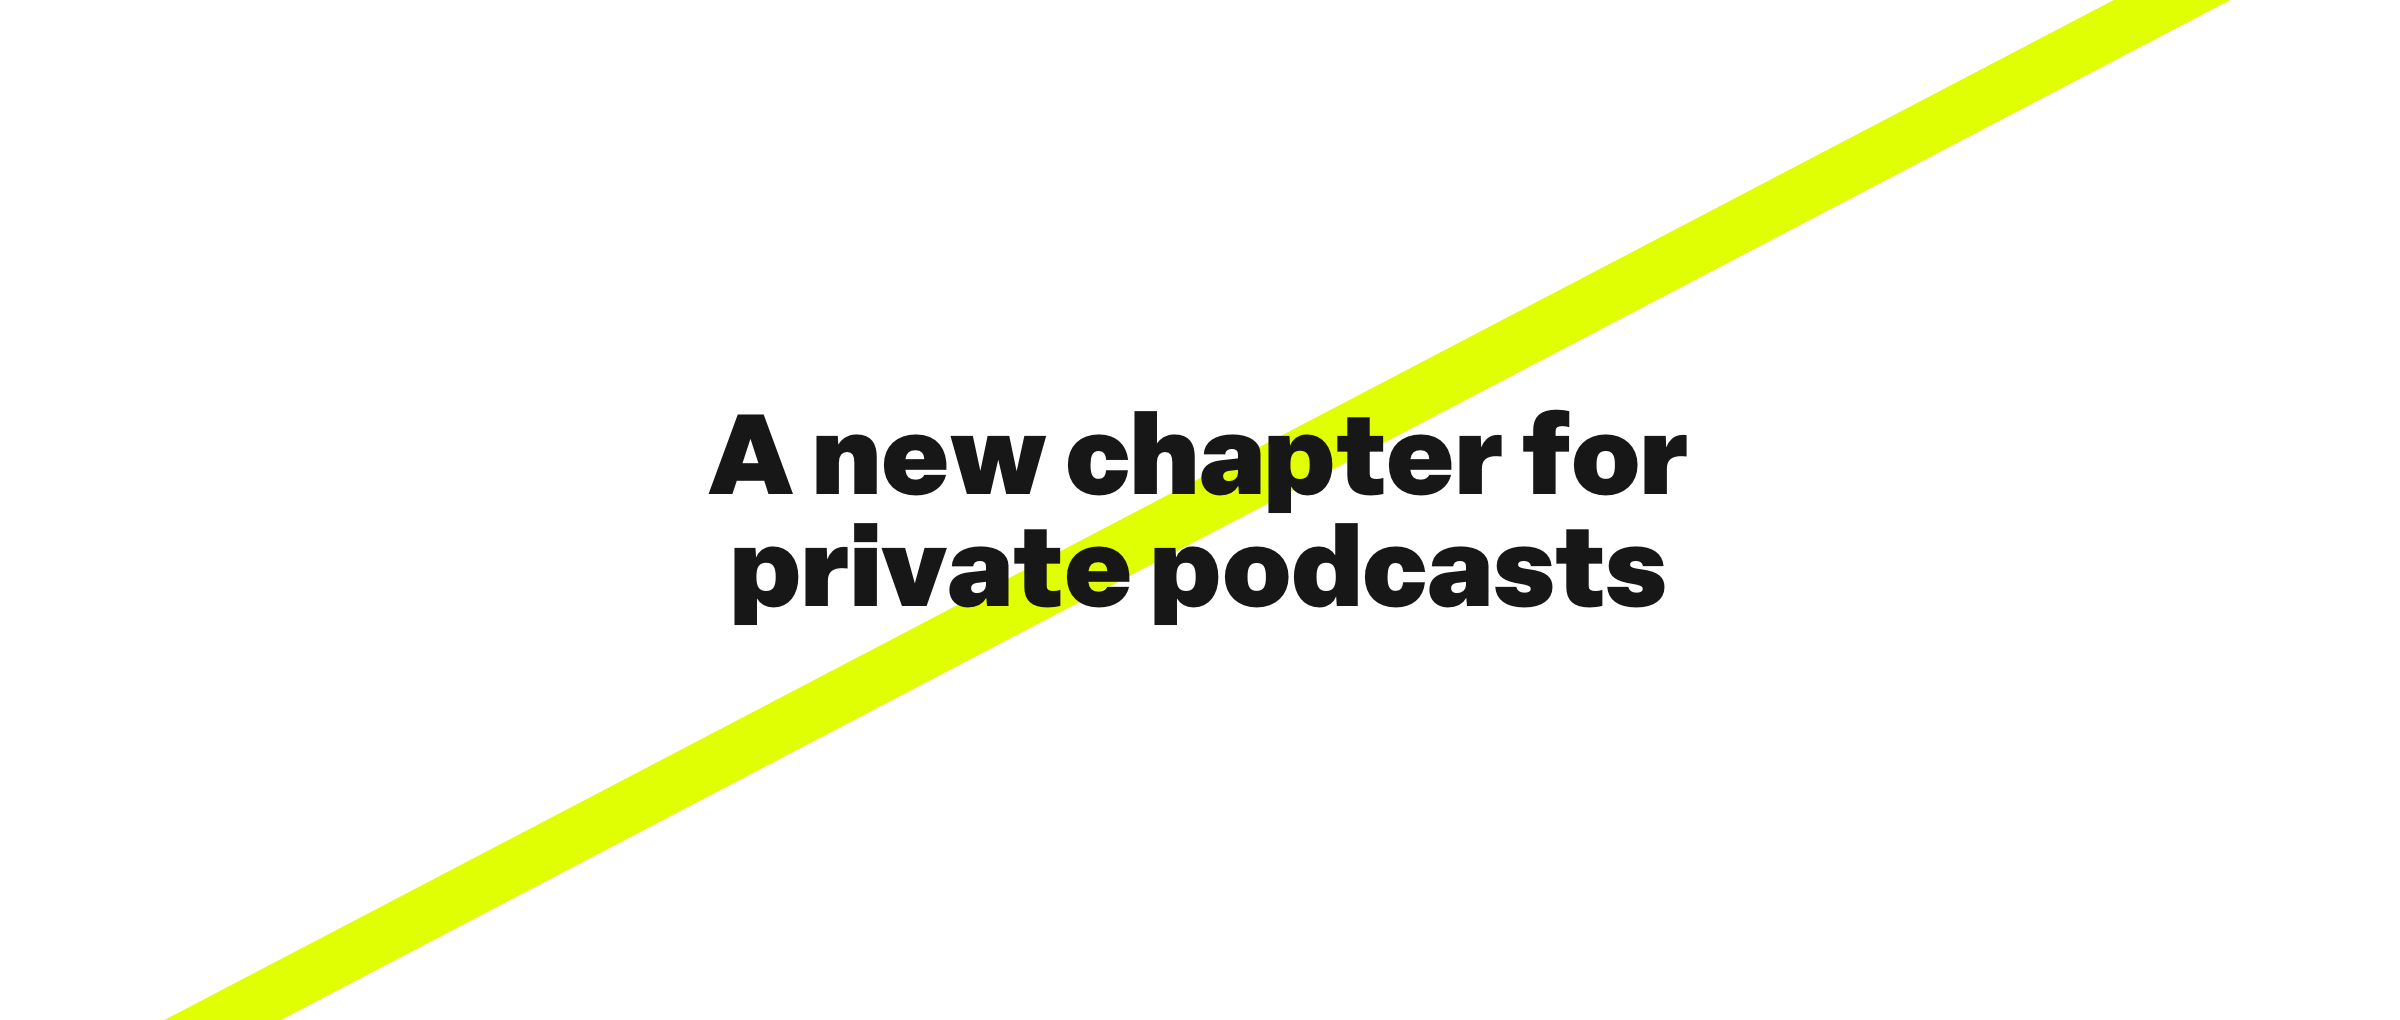 A new chapter for private podcasts